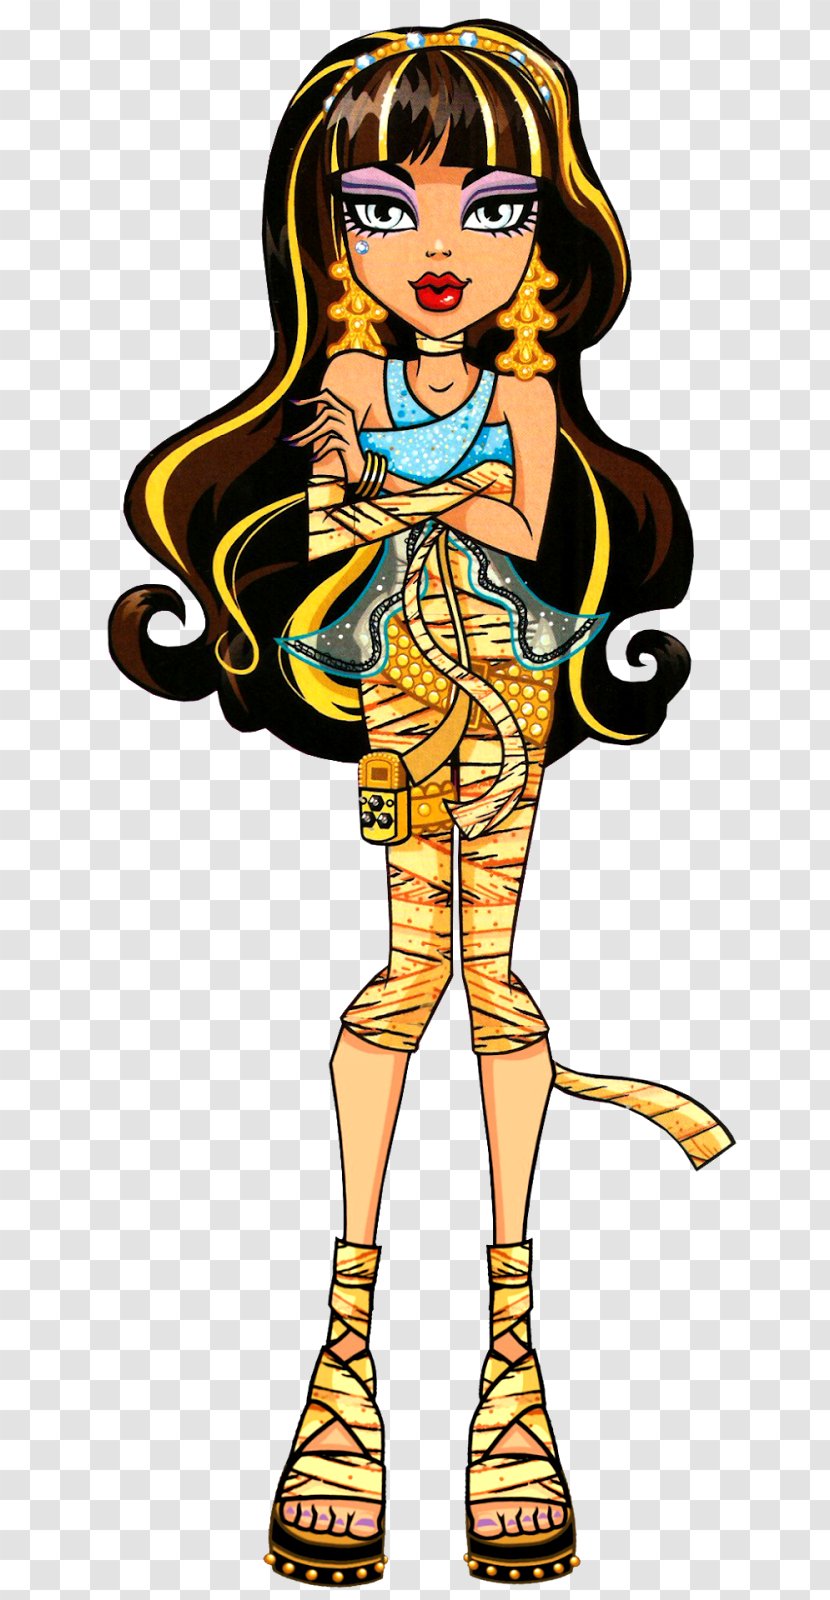 Monster High Cleo De Nile Frankie Stein Ghoul Doll - Silhouette Transparent PNG